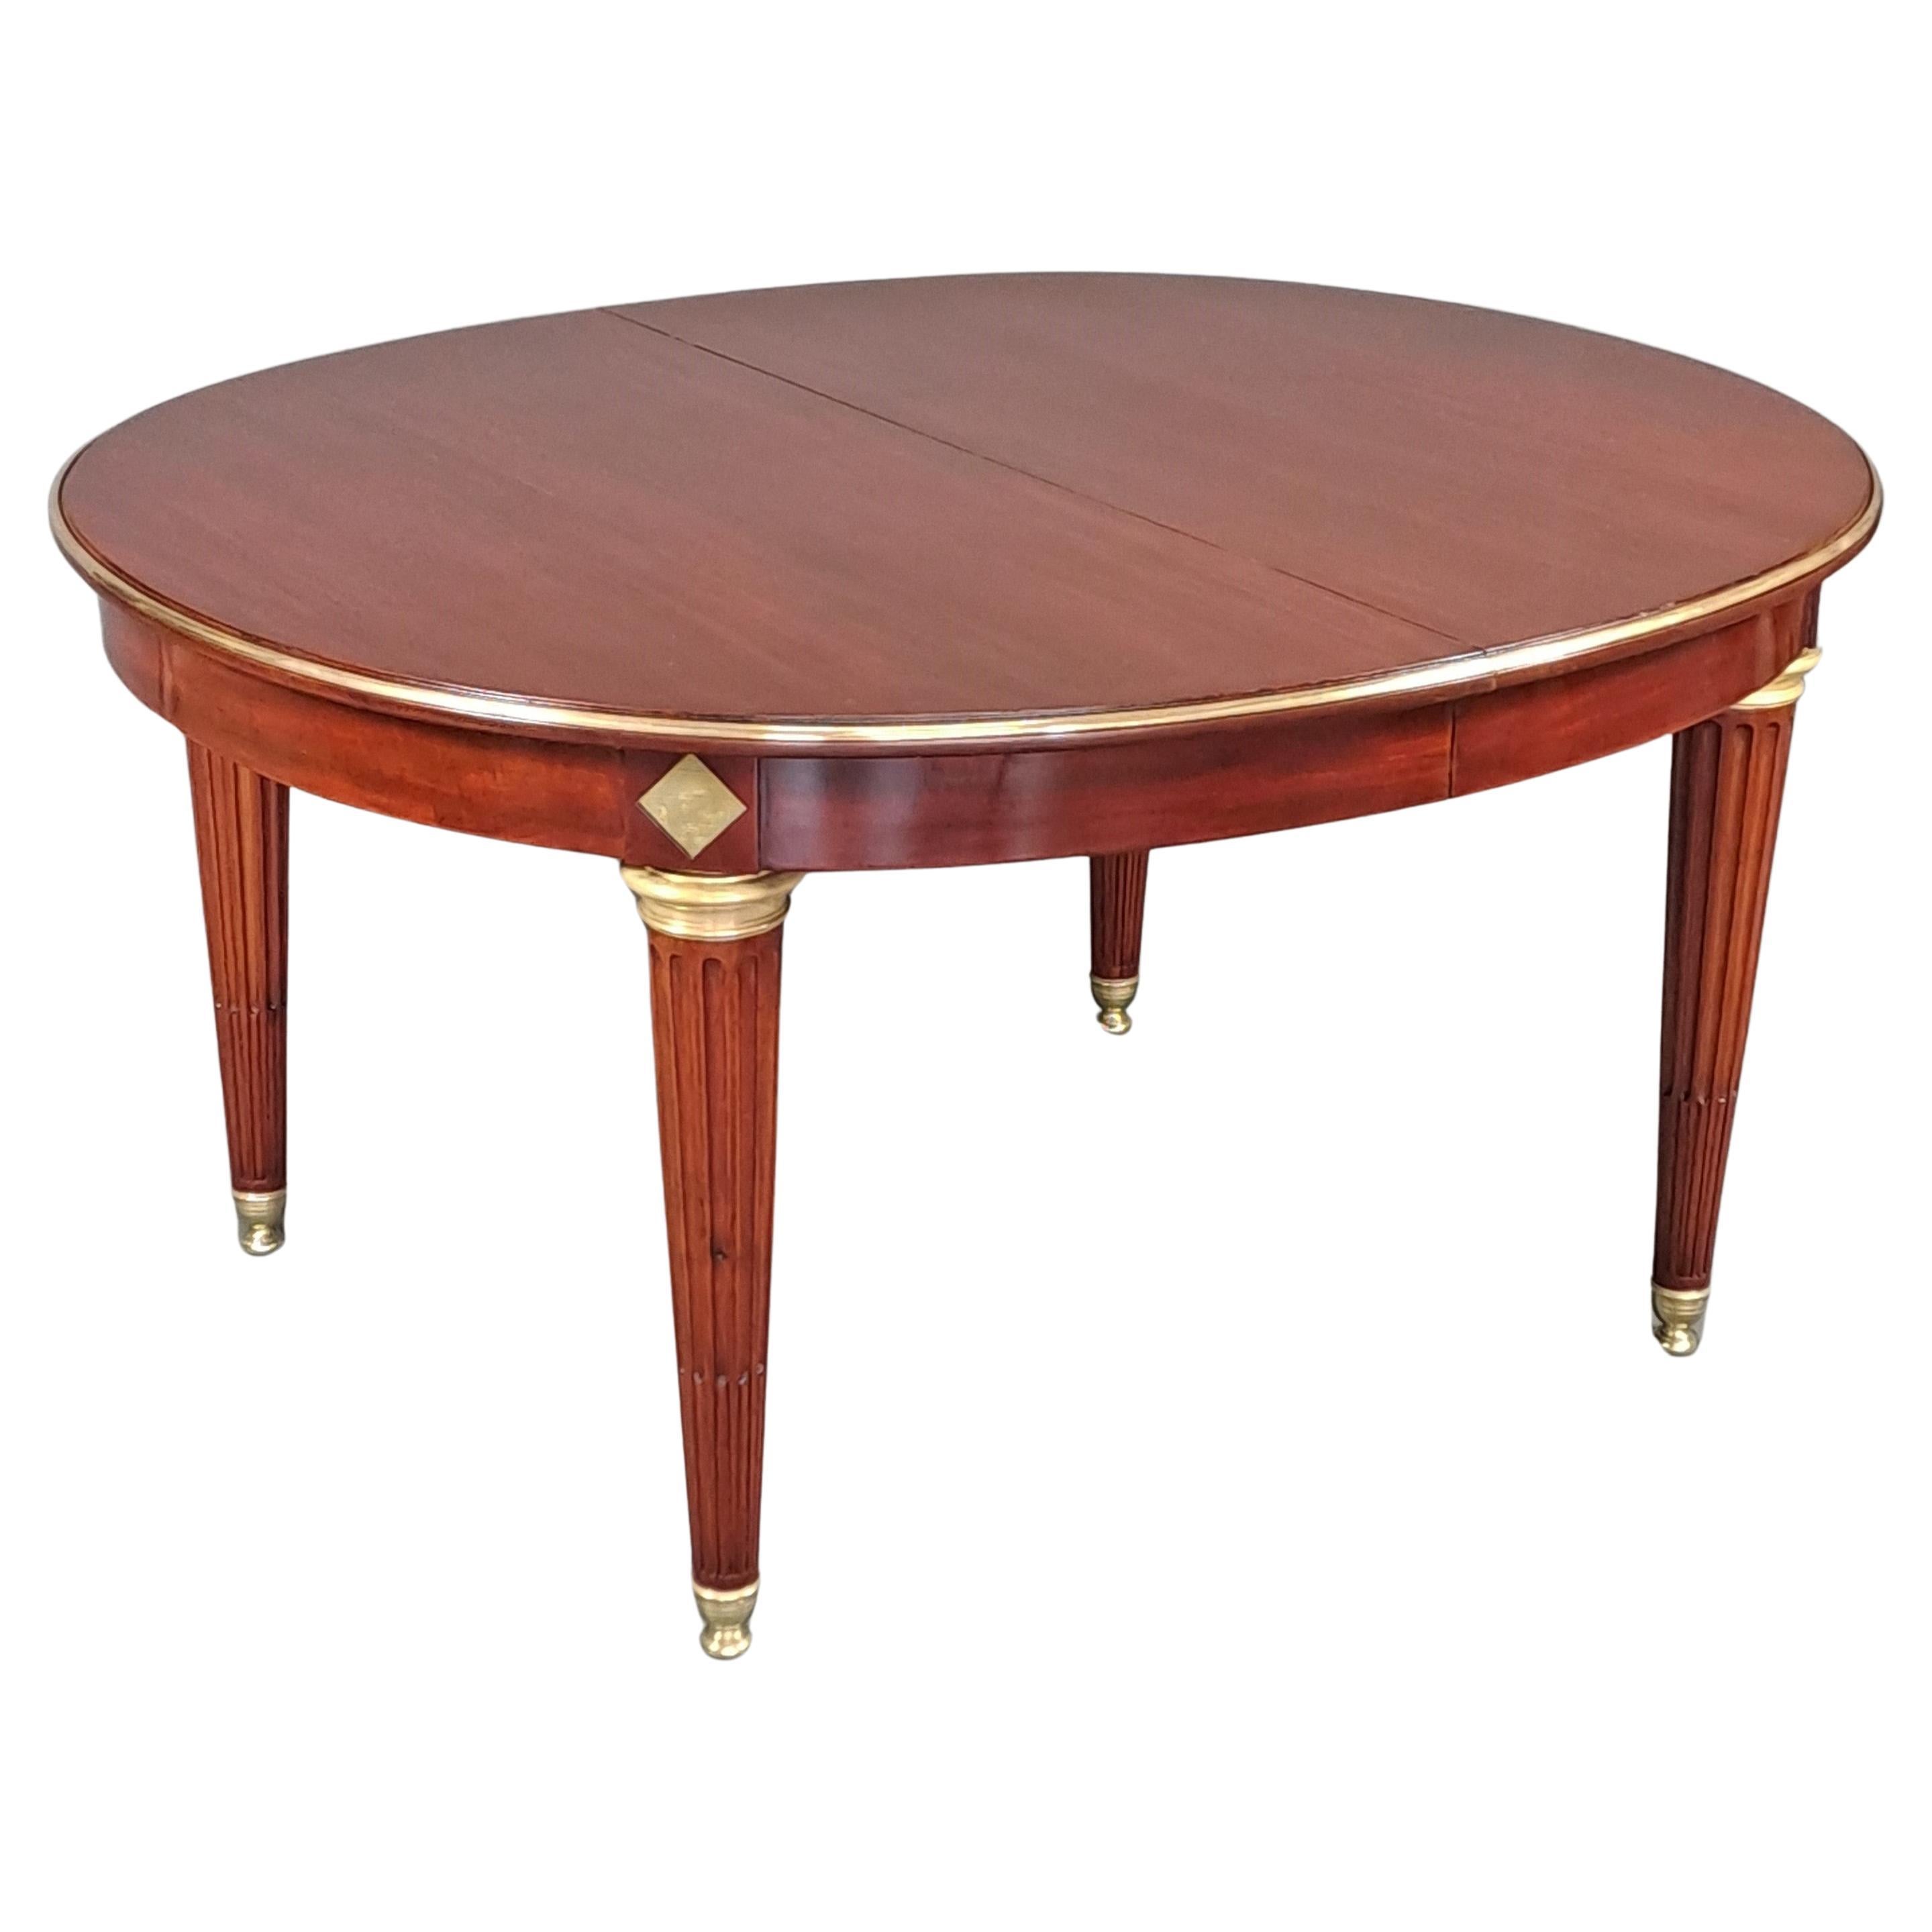 Louis XVI Style Dining Room Table In Mahogany And Gilt Bronze For Sale